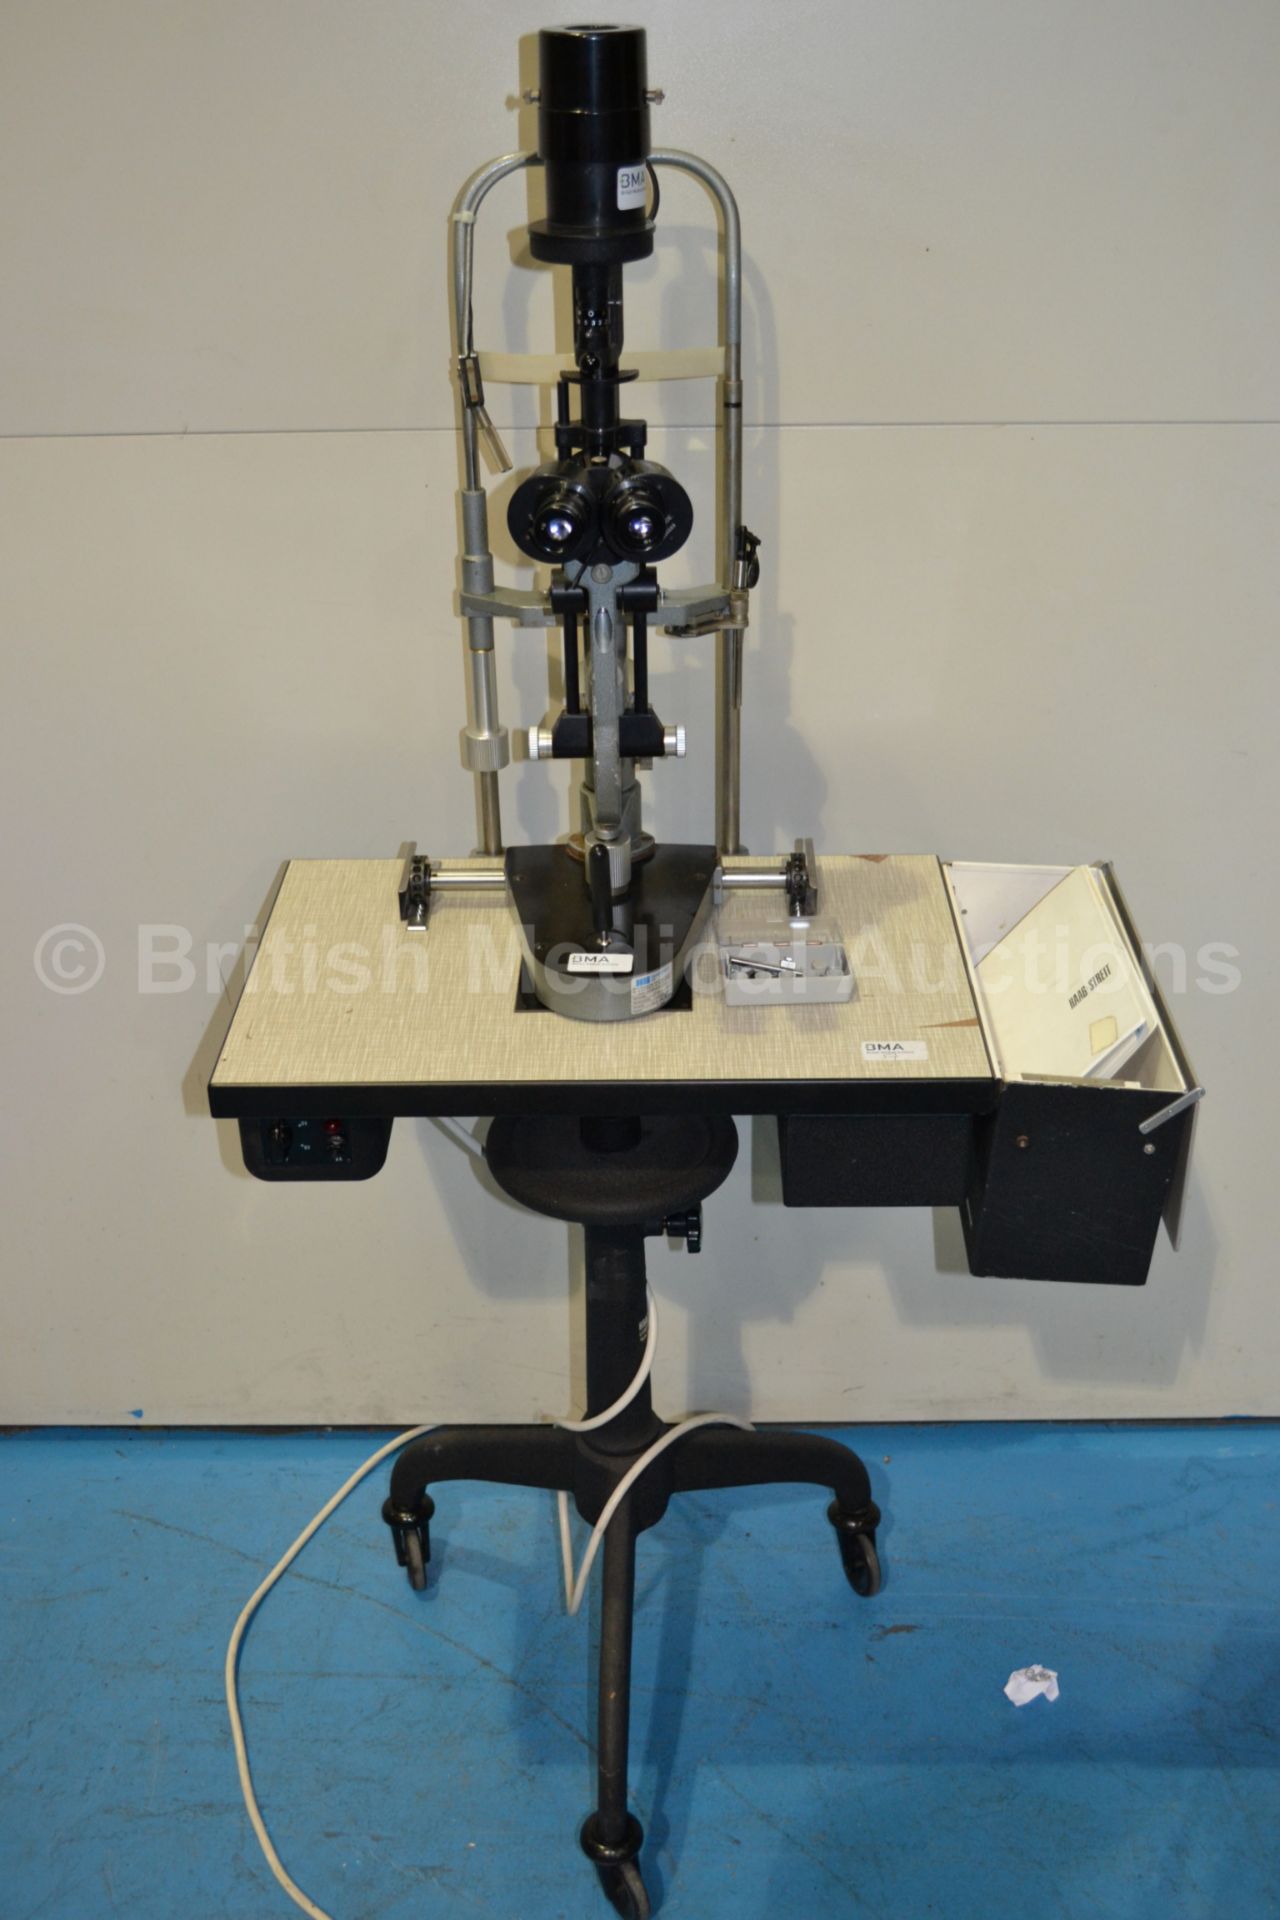 Haag Streit Slit Lamp 900 - Untested Due to Cut Pl